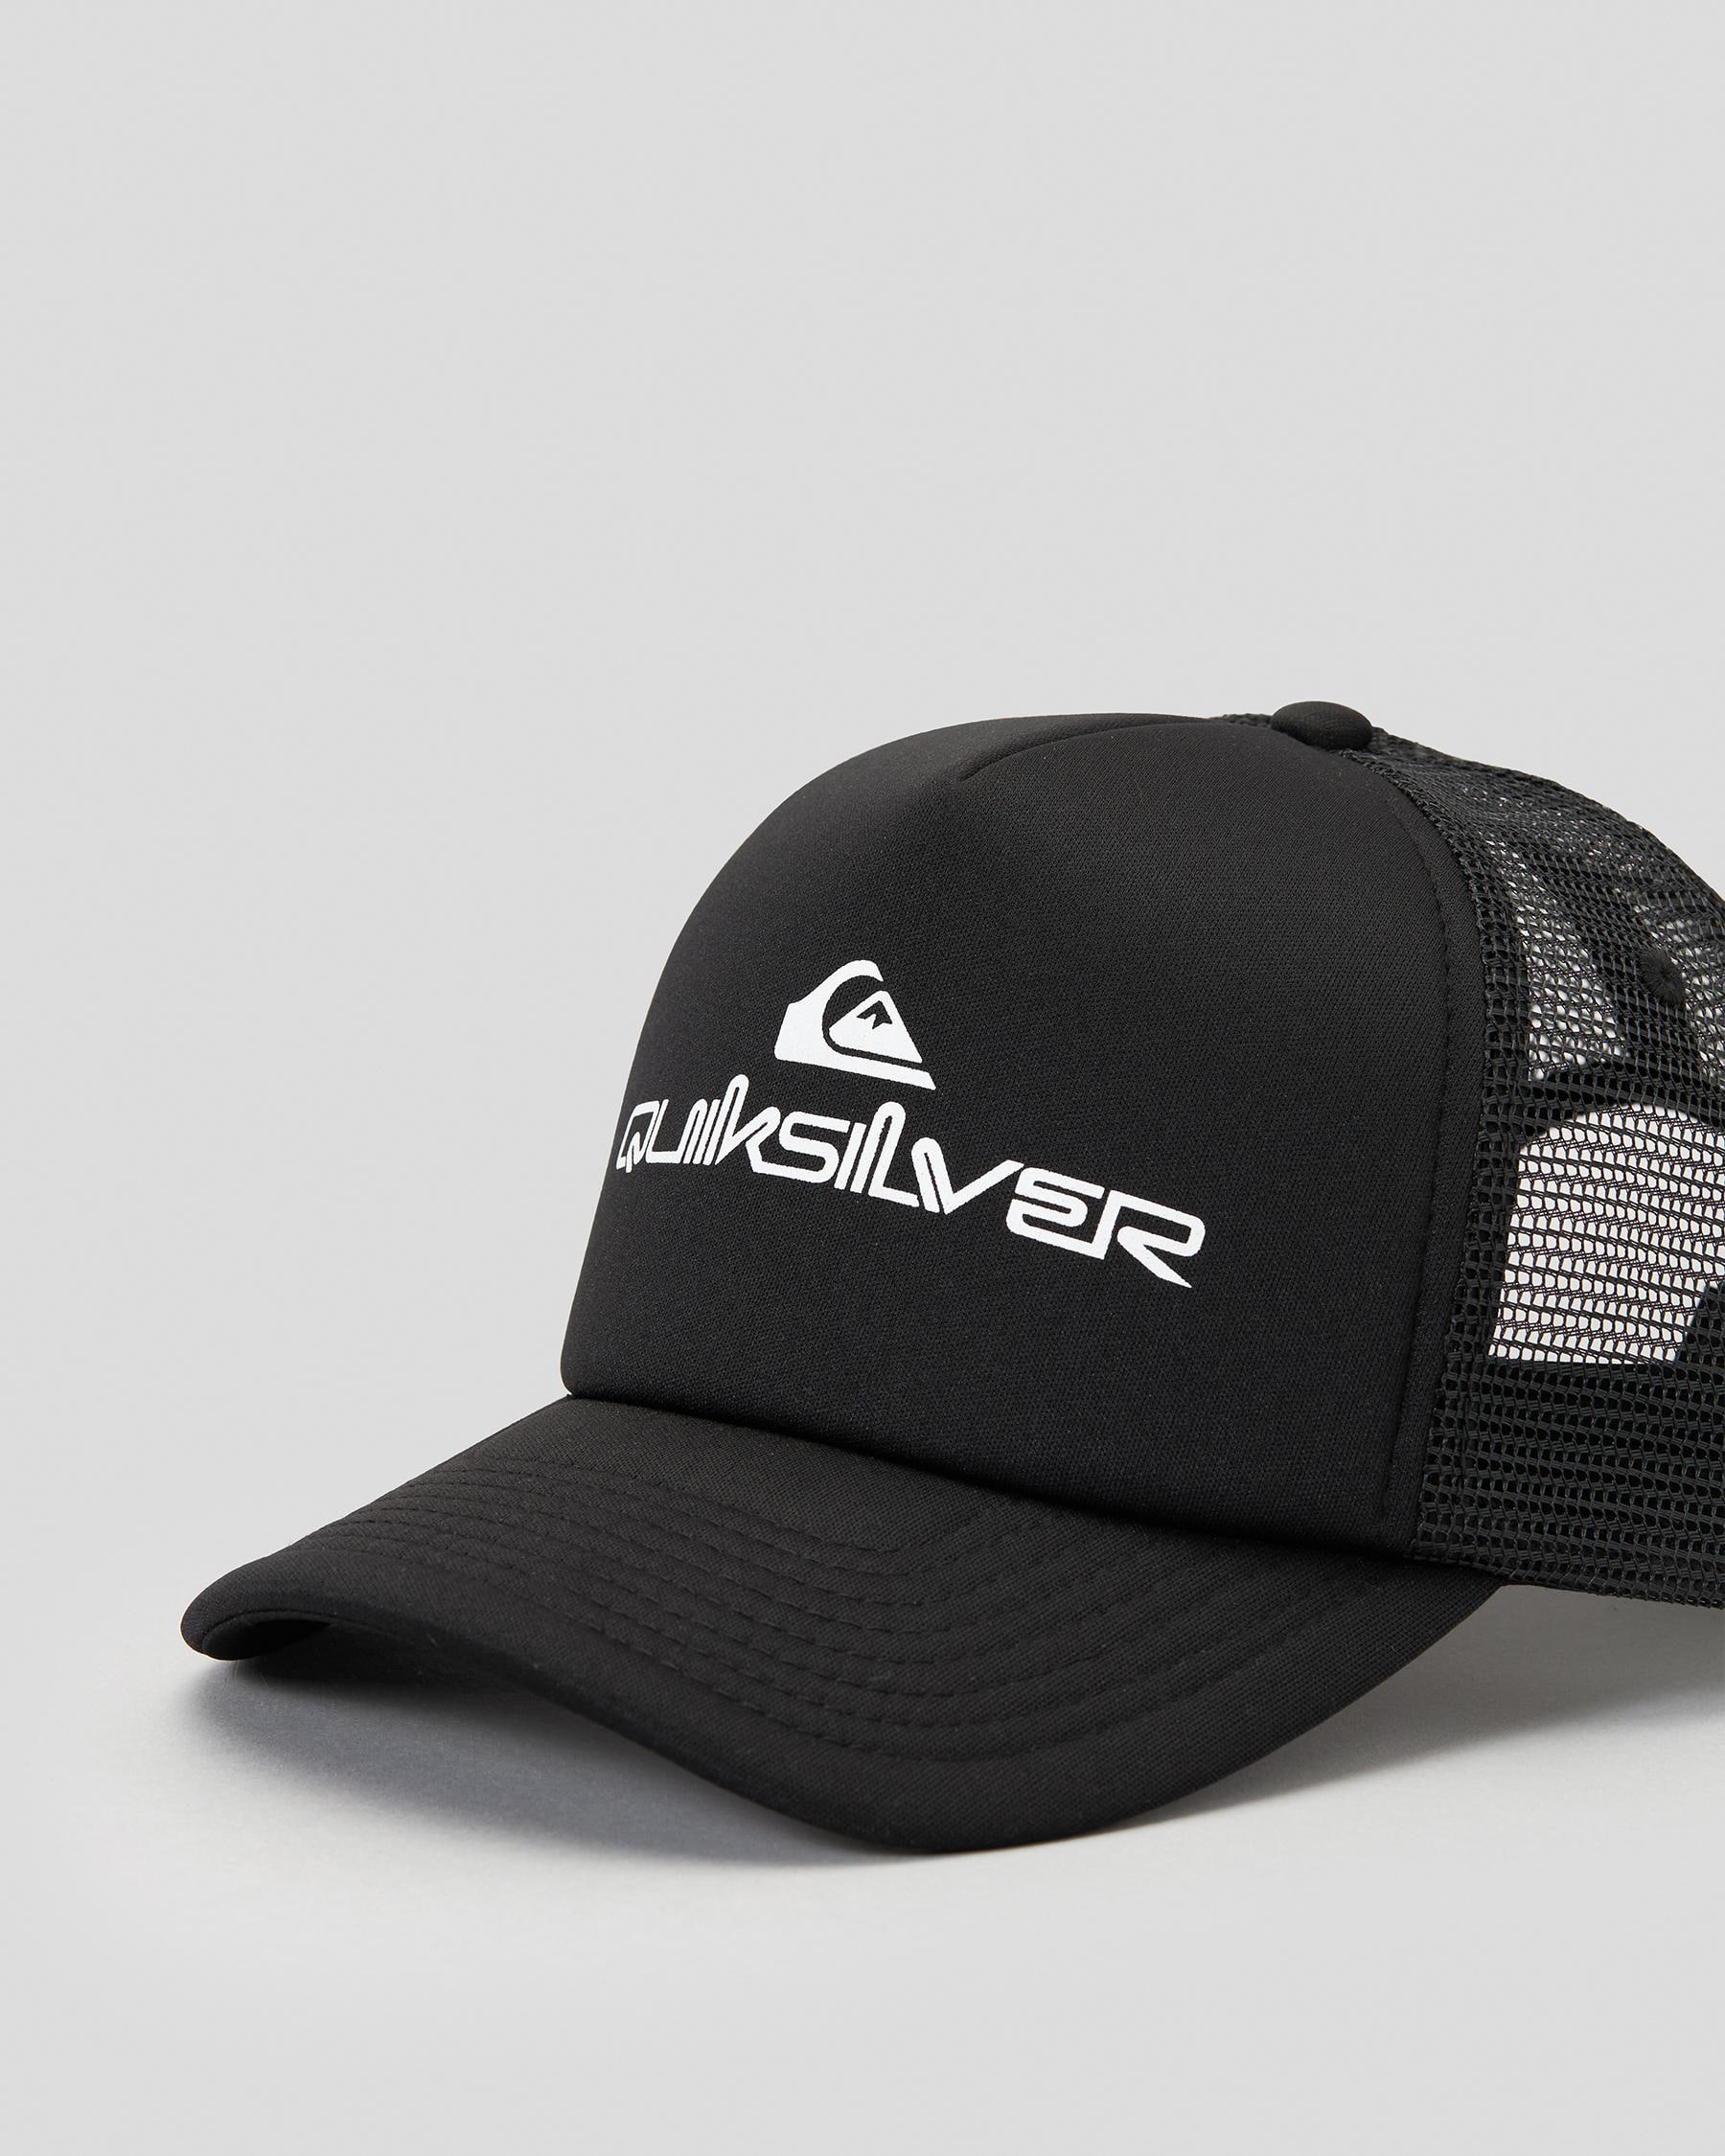 Returns - States Beach City Shipping & Omnistack - Easy In FREE* Quiksilver Trucker Black United Cap